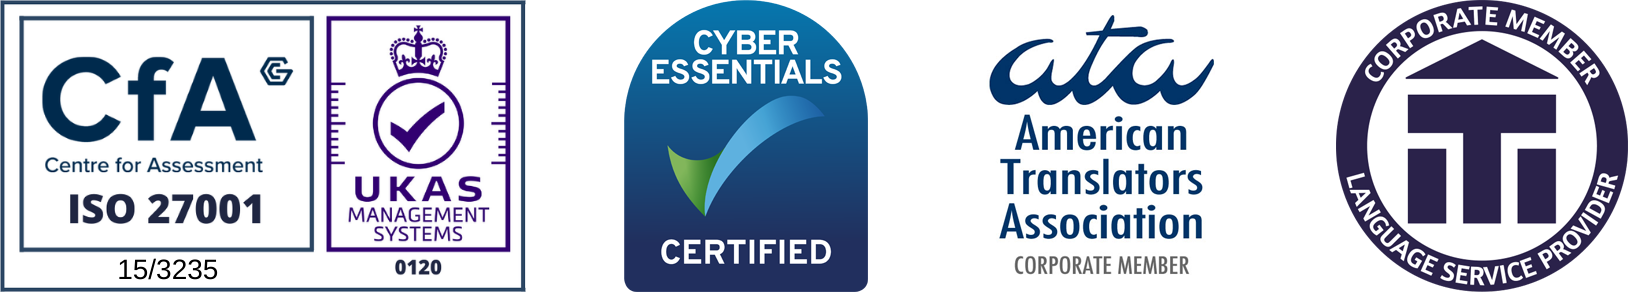 CFA Centre for Assessment ISO 27001 15/3235, UKAS Management Systems 0120, Cyber Essentials Certified, American Translators Association Corporate Member, ITI Corporate Member - Language Service Provider